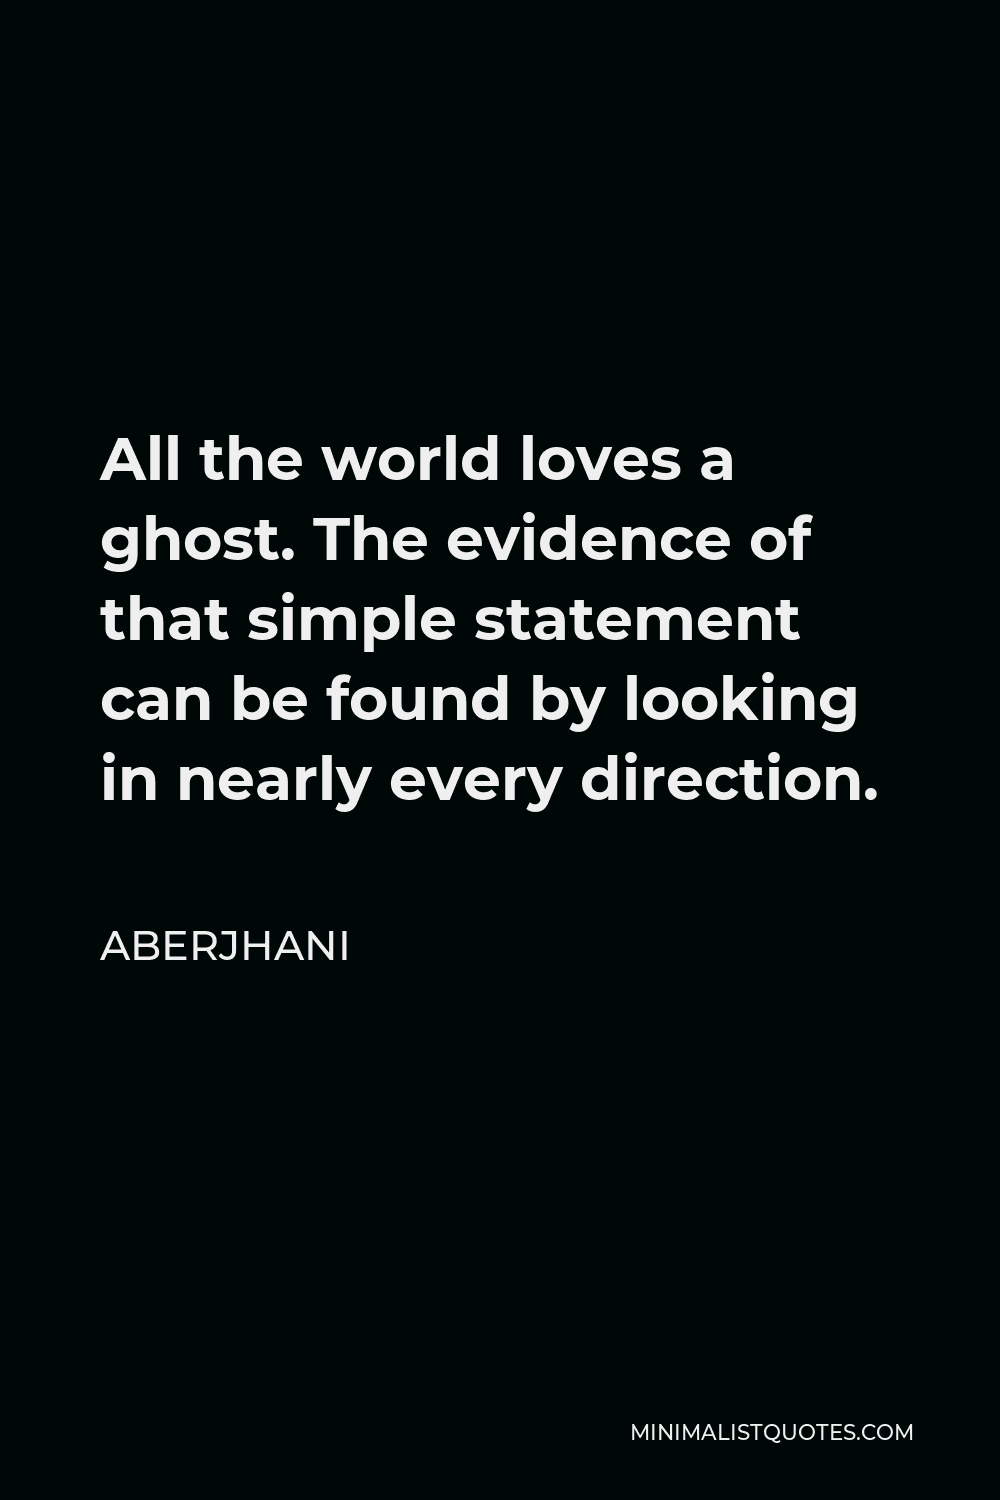 Aberjhani Quote - All the world loves a ghost. The evidence of that simple statement can be found by looking in nearly every direction.